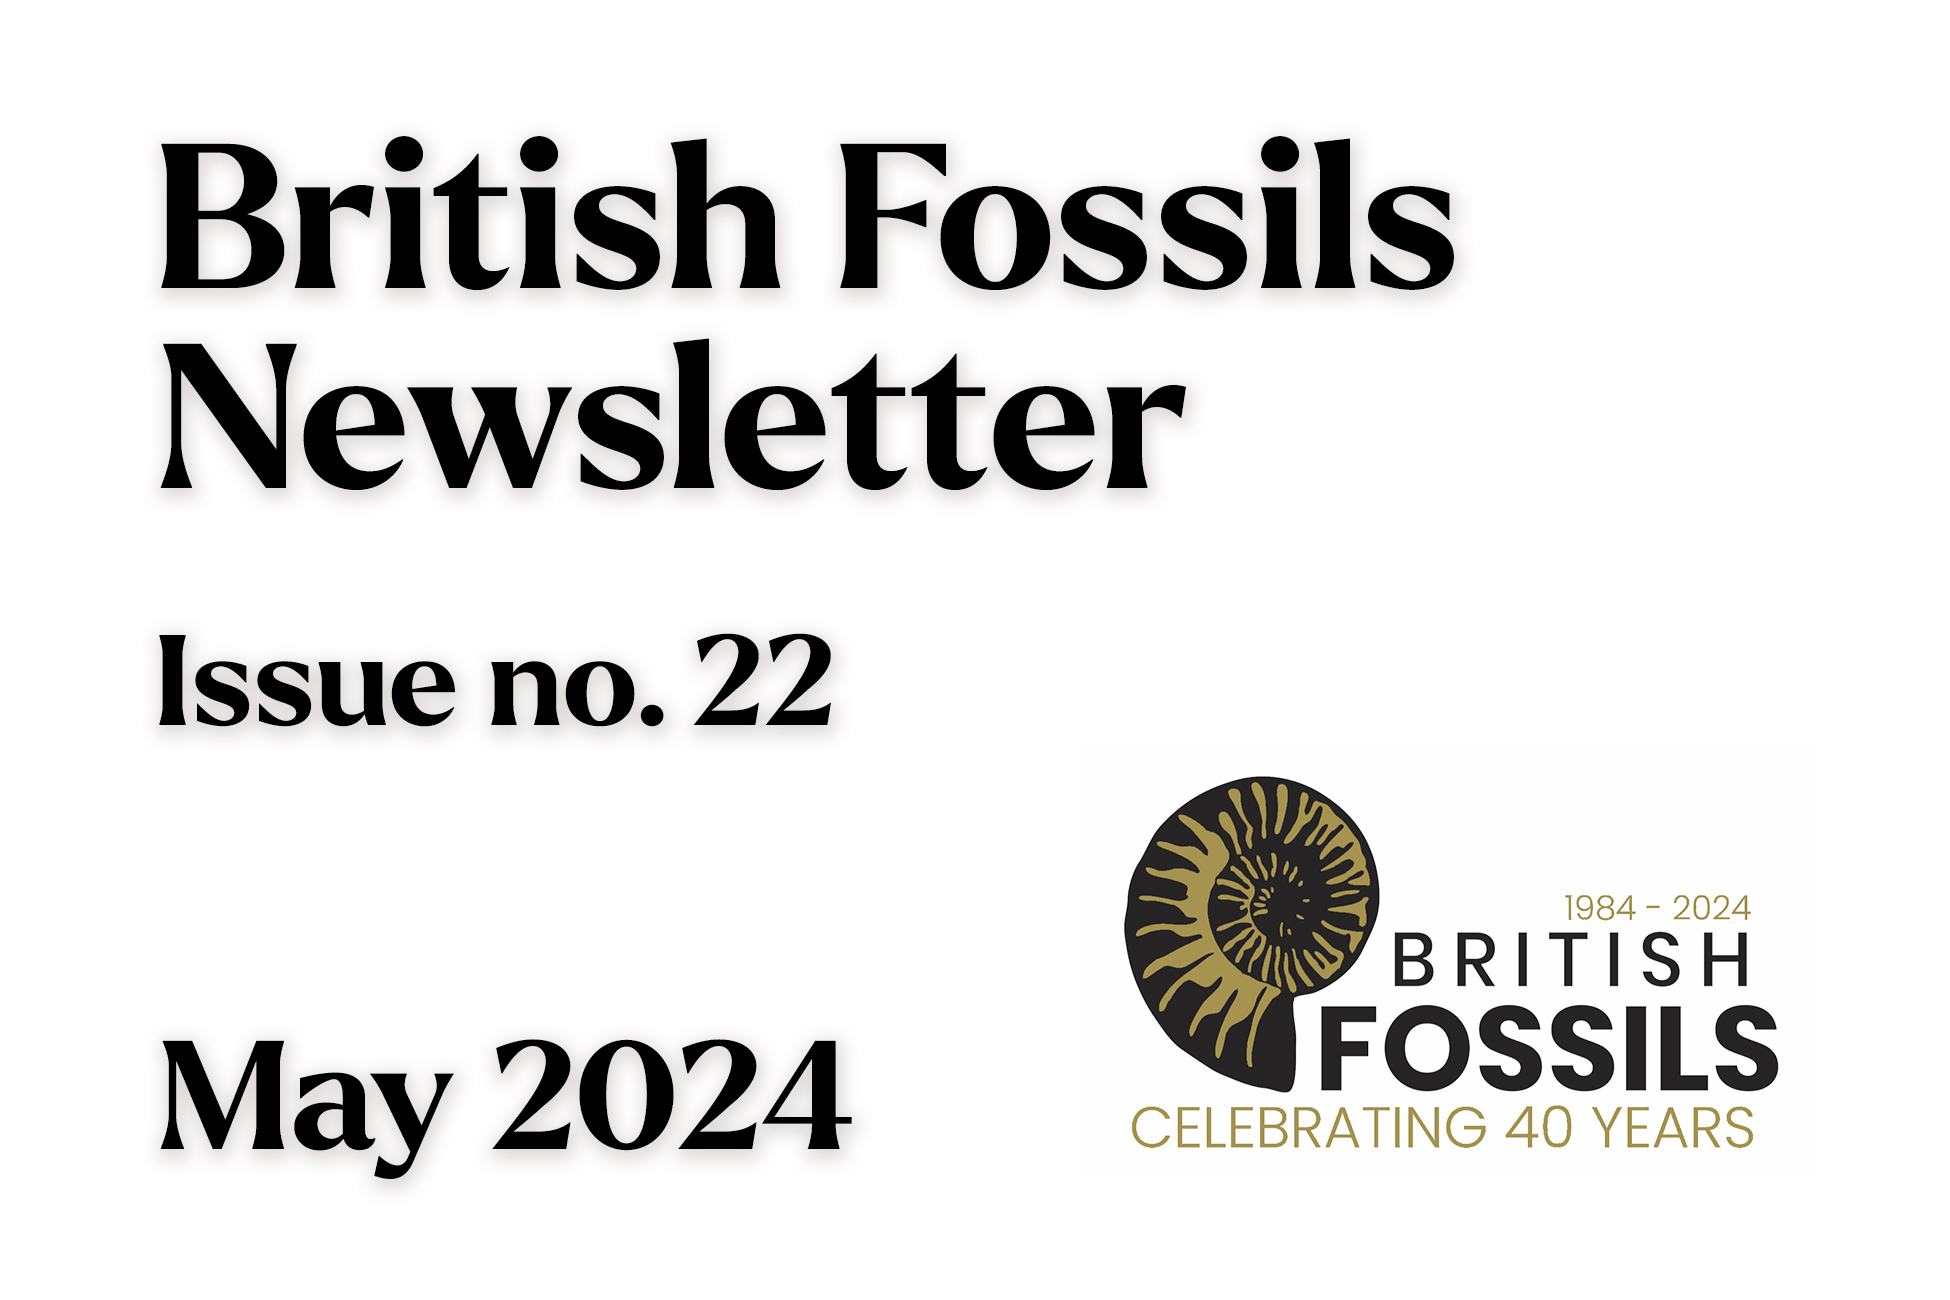 British Fossils Newsletter – May 2024